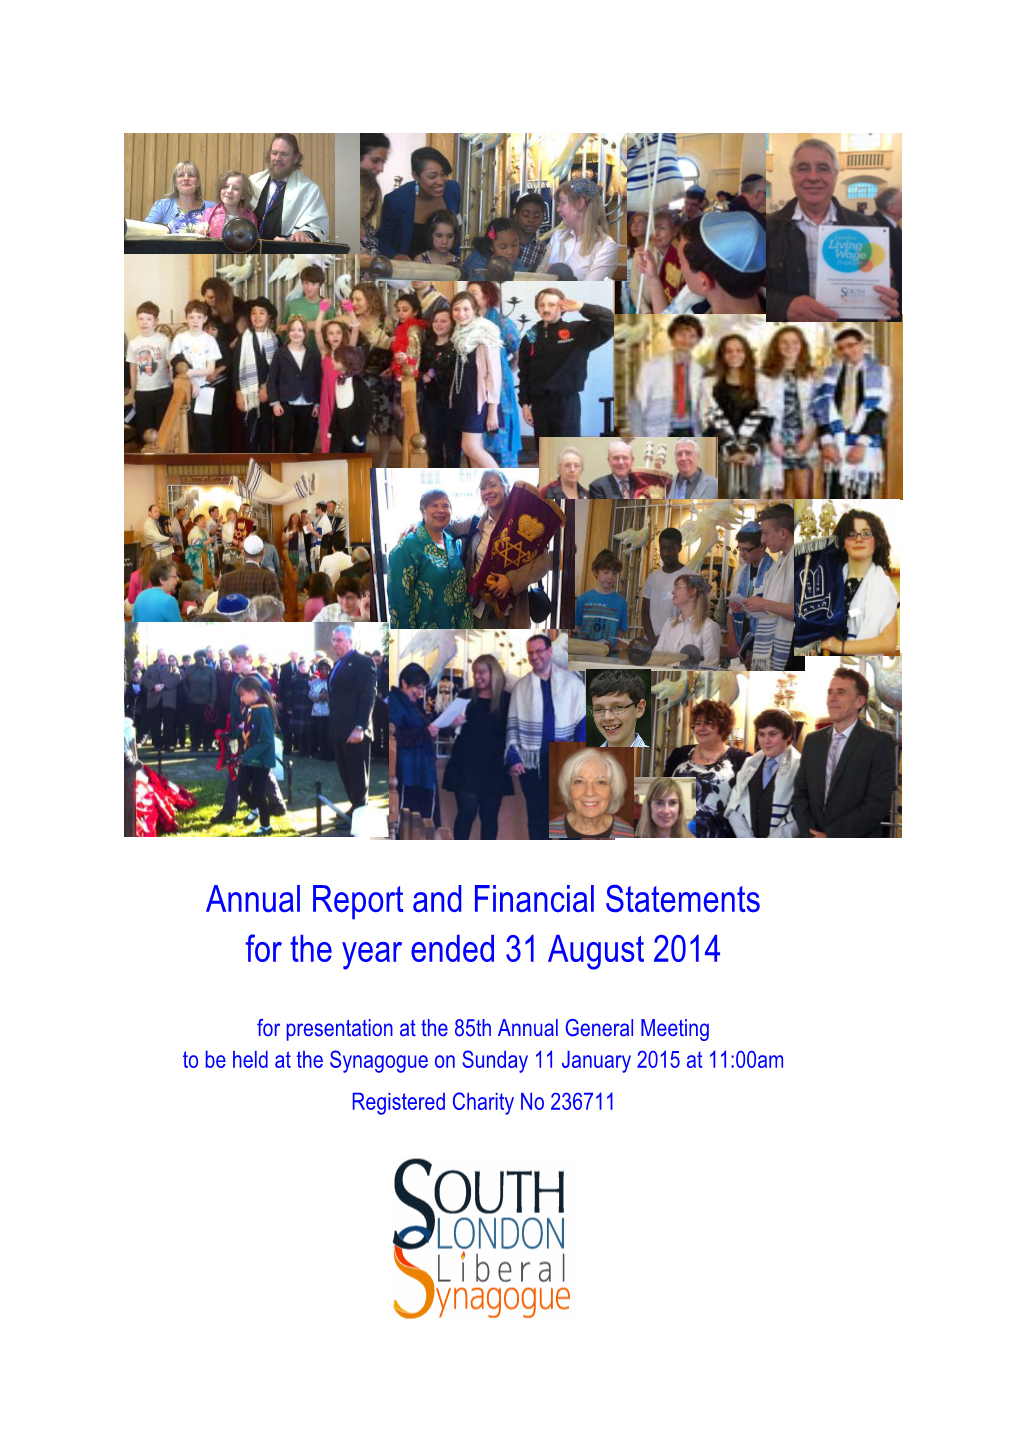 Annual Report and Financial Statements for the Year Ended 31 August 2014